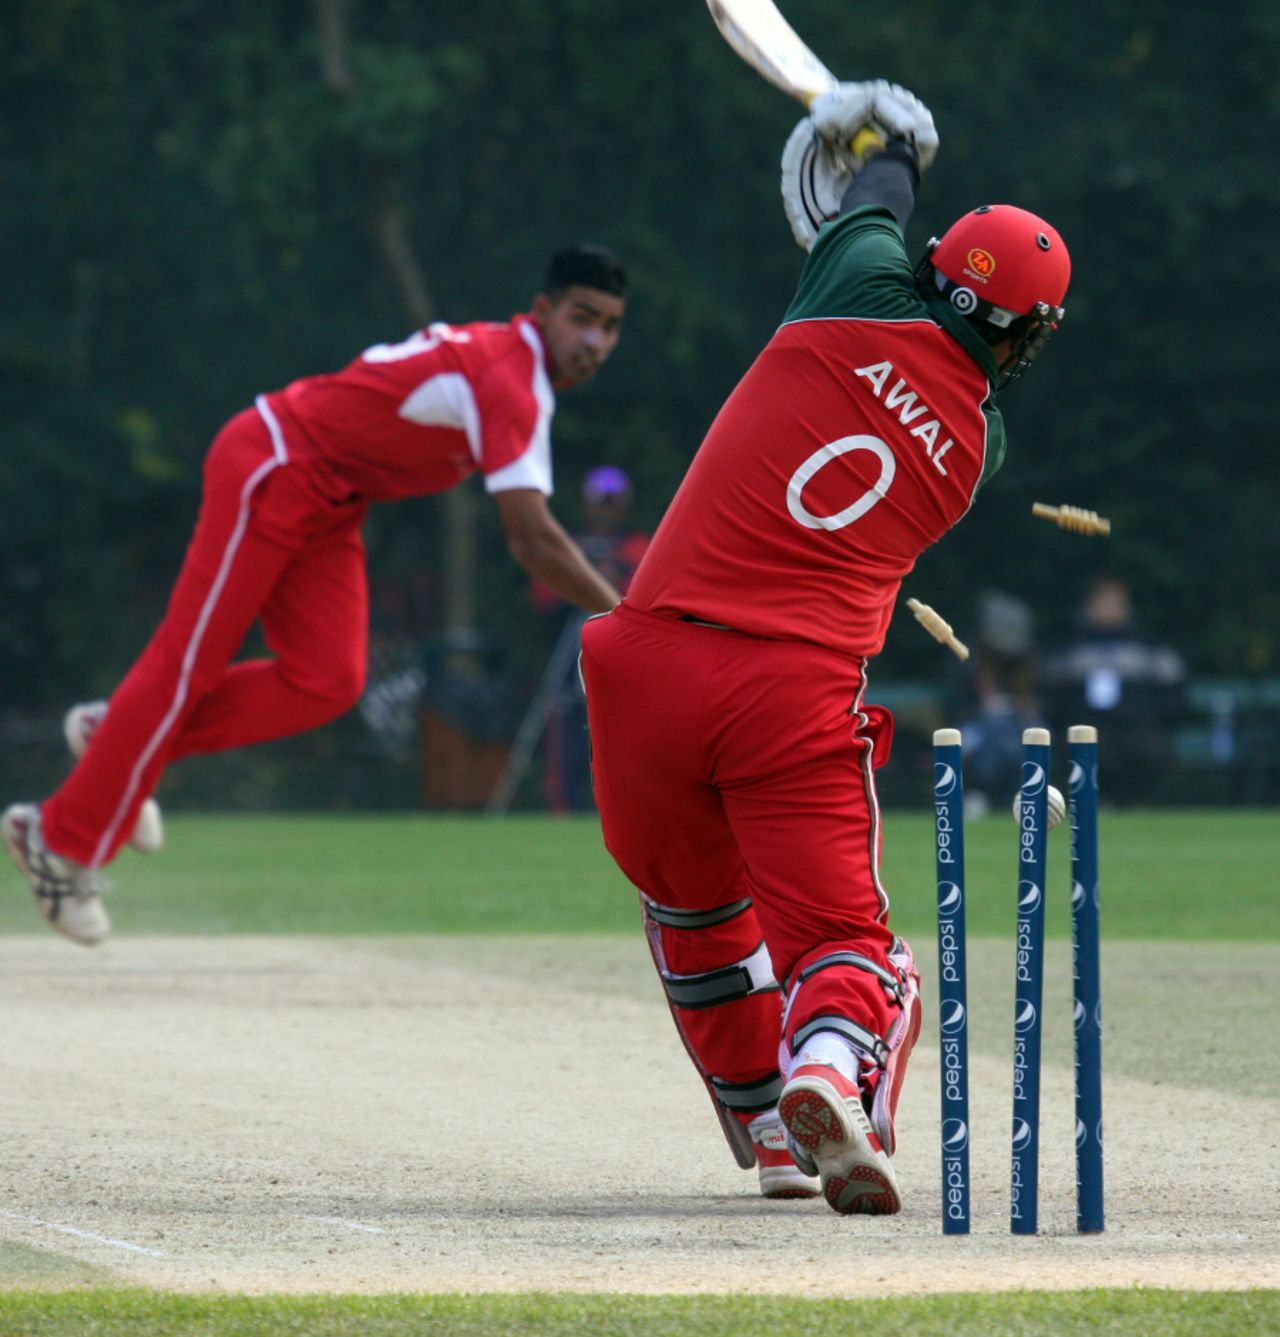 Awal Khan is clean bowled by Irfan Ahmed, Italy v Papua New Guinea, WCL Division 3, Wong Nai, January 23, 2011